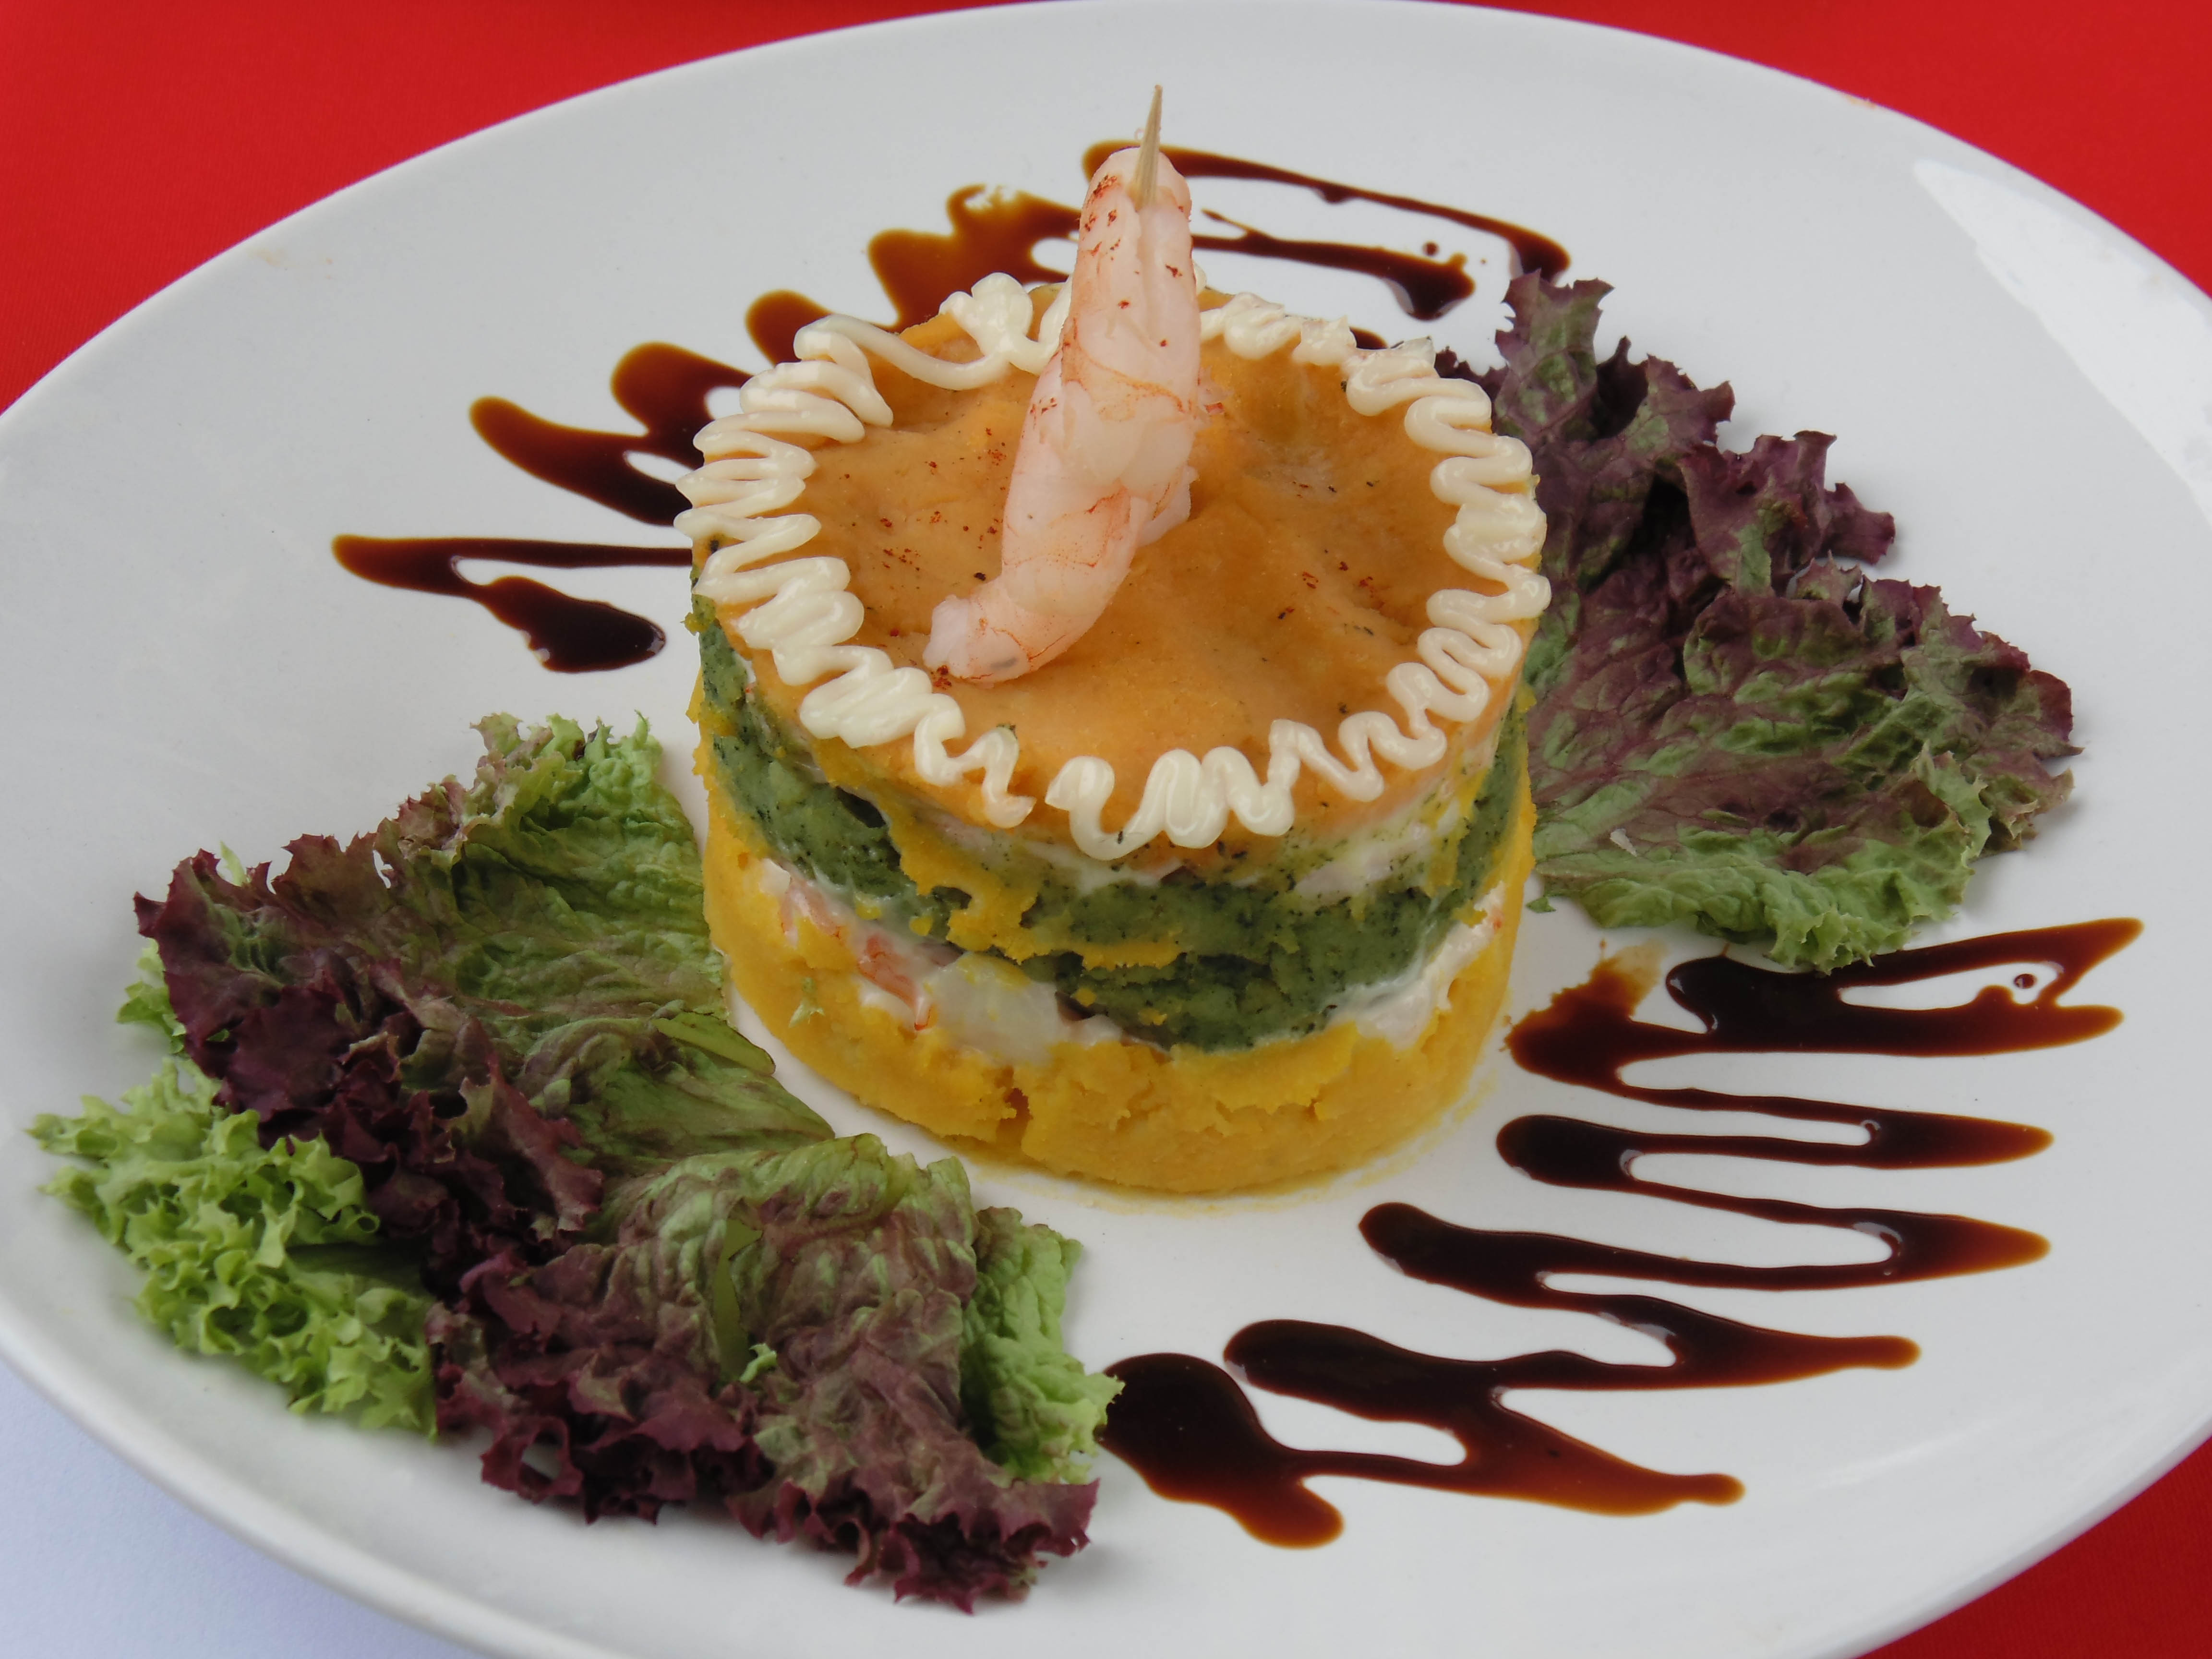 You are currently viewing Panorama exquisito! Perú Gourmet 2014